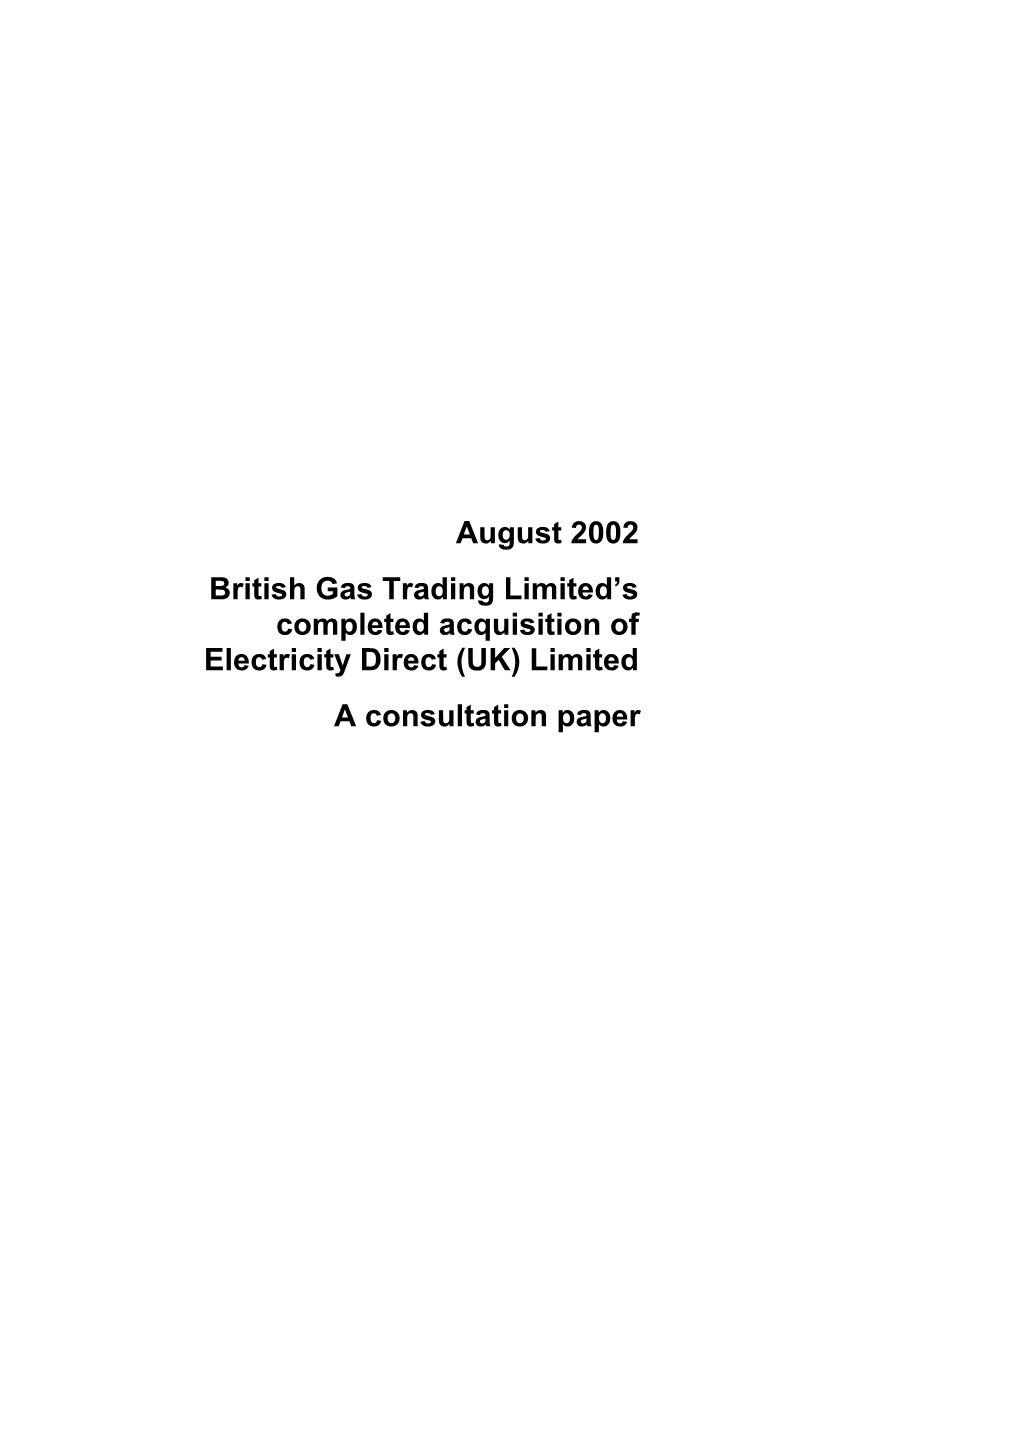 British Gas Trading Limited S Completed Acquisition of Electricity Direct (UK) Limited